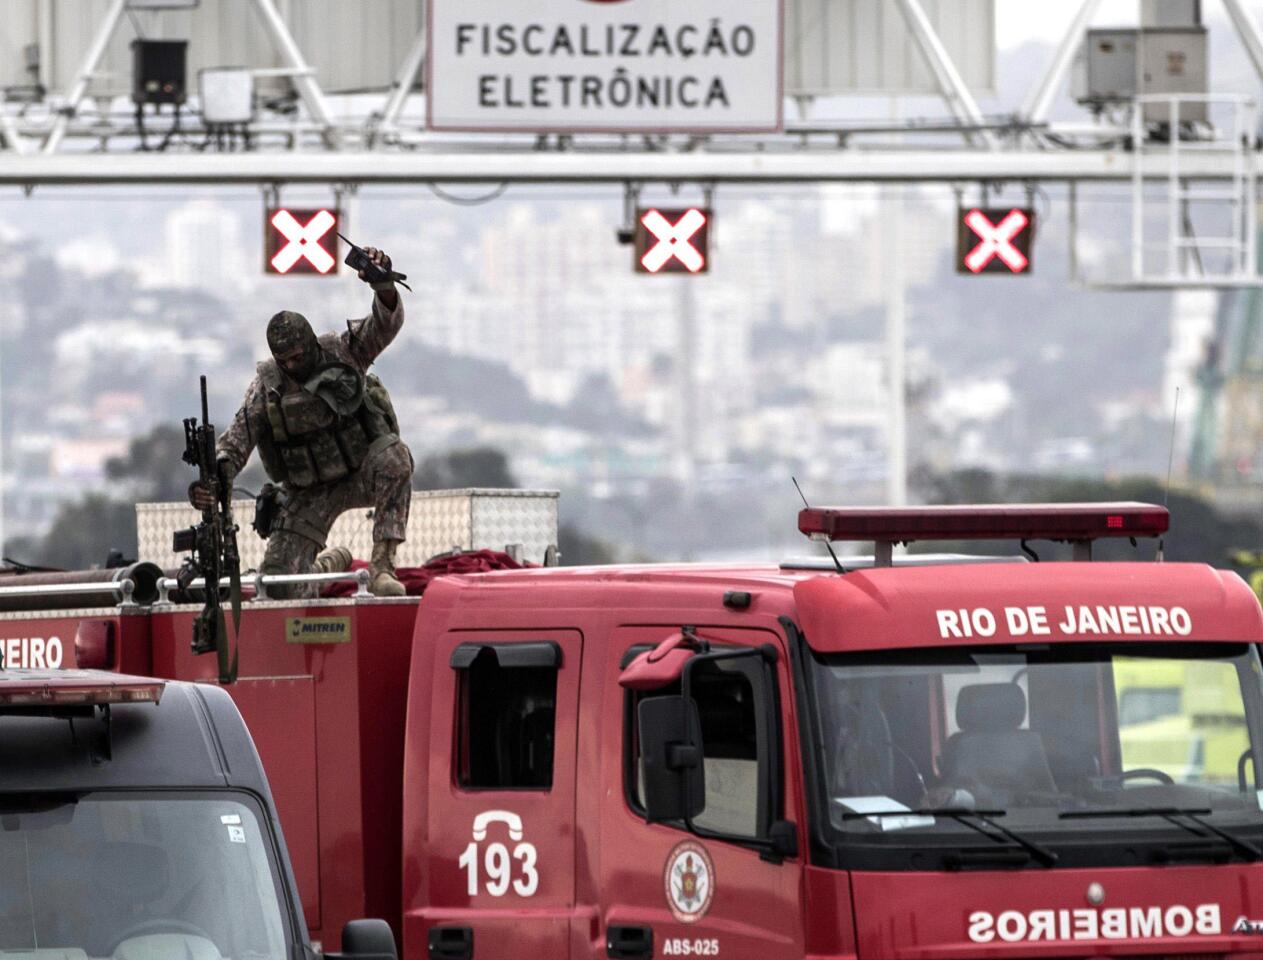 A police sniper celebrates after fatally shooting a hijacker who was threatening passengers on a bus in Rio de Janeiro on Tuesday. An armed man hijacked a bus and kept passengers and the driver as hostages while he threatened to burn the vehicle with gas.